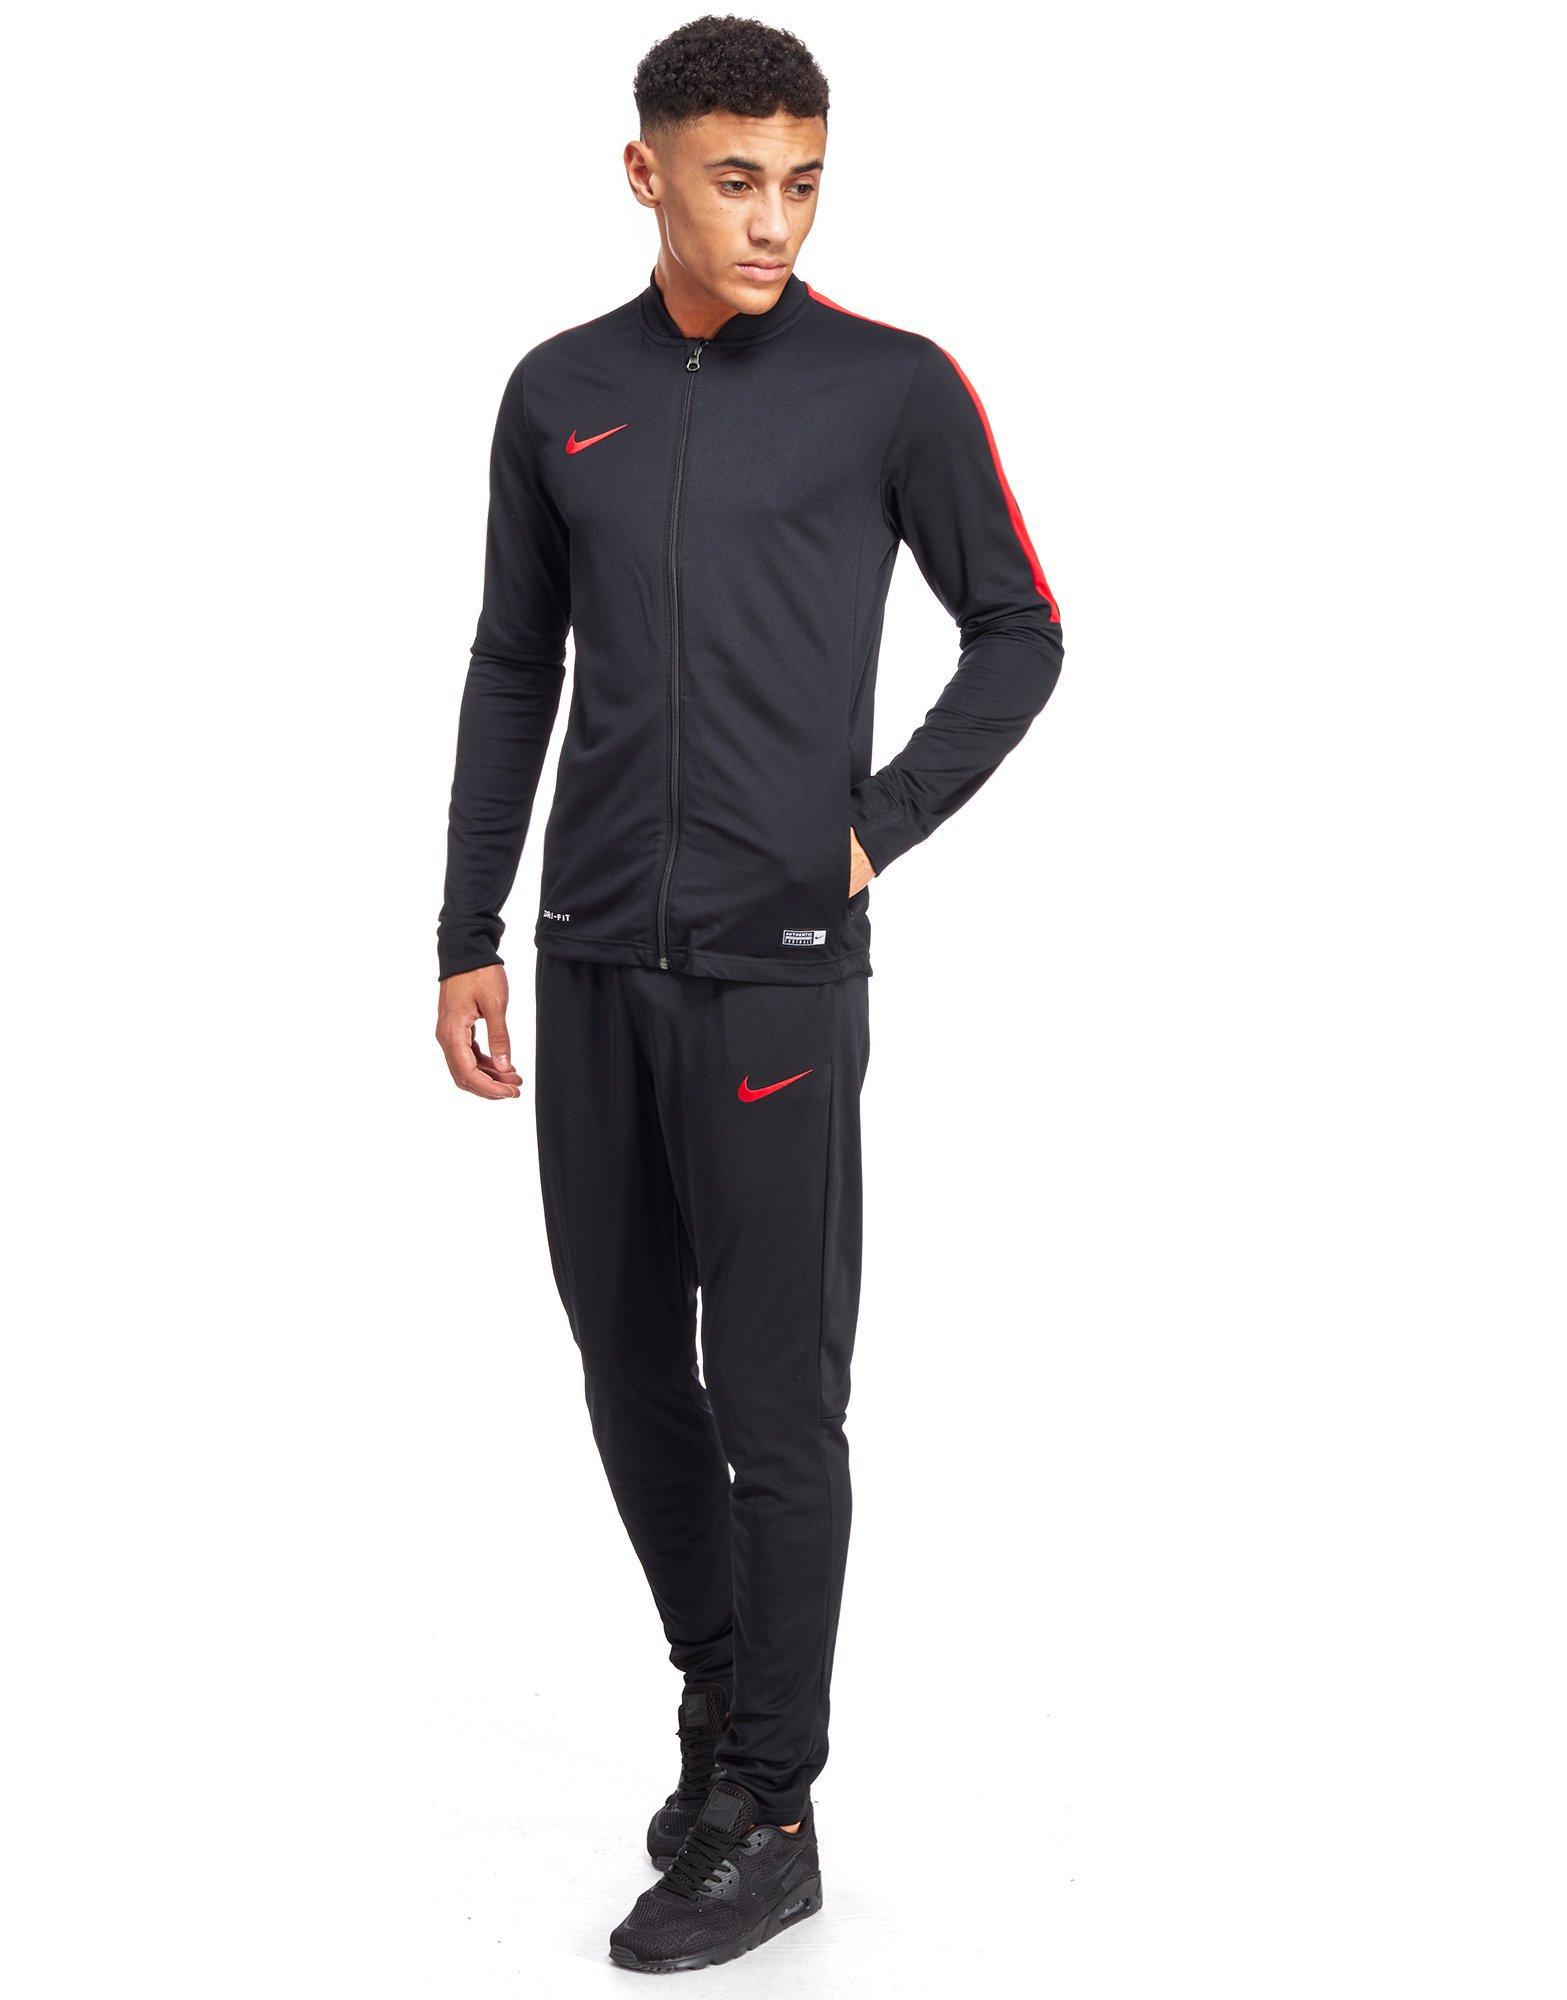 Nike Synthetic Academy Poly Tracksuit in Black/White (Black) for Men - Lyst